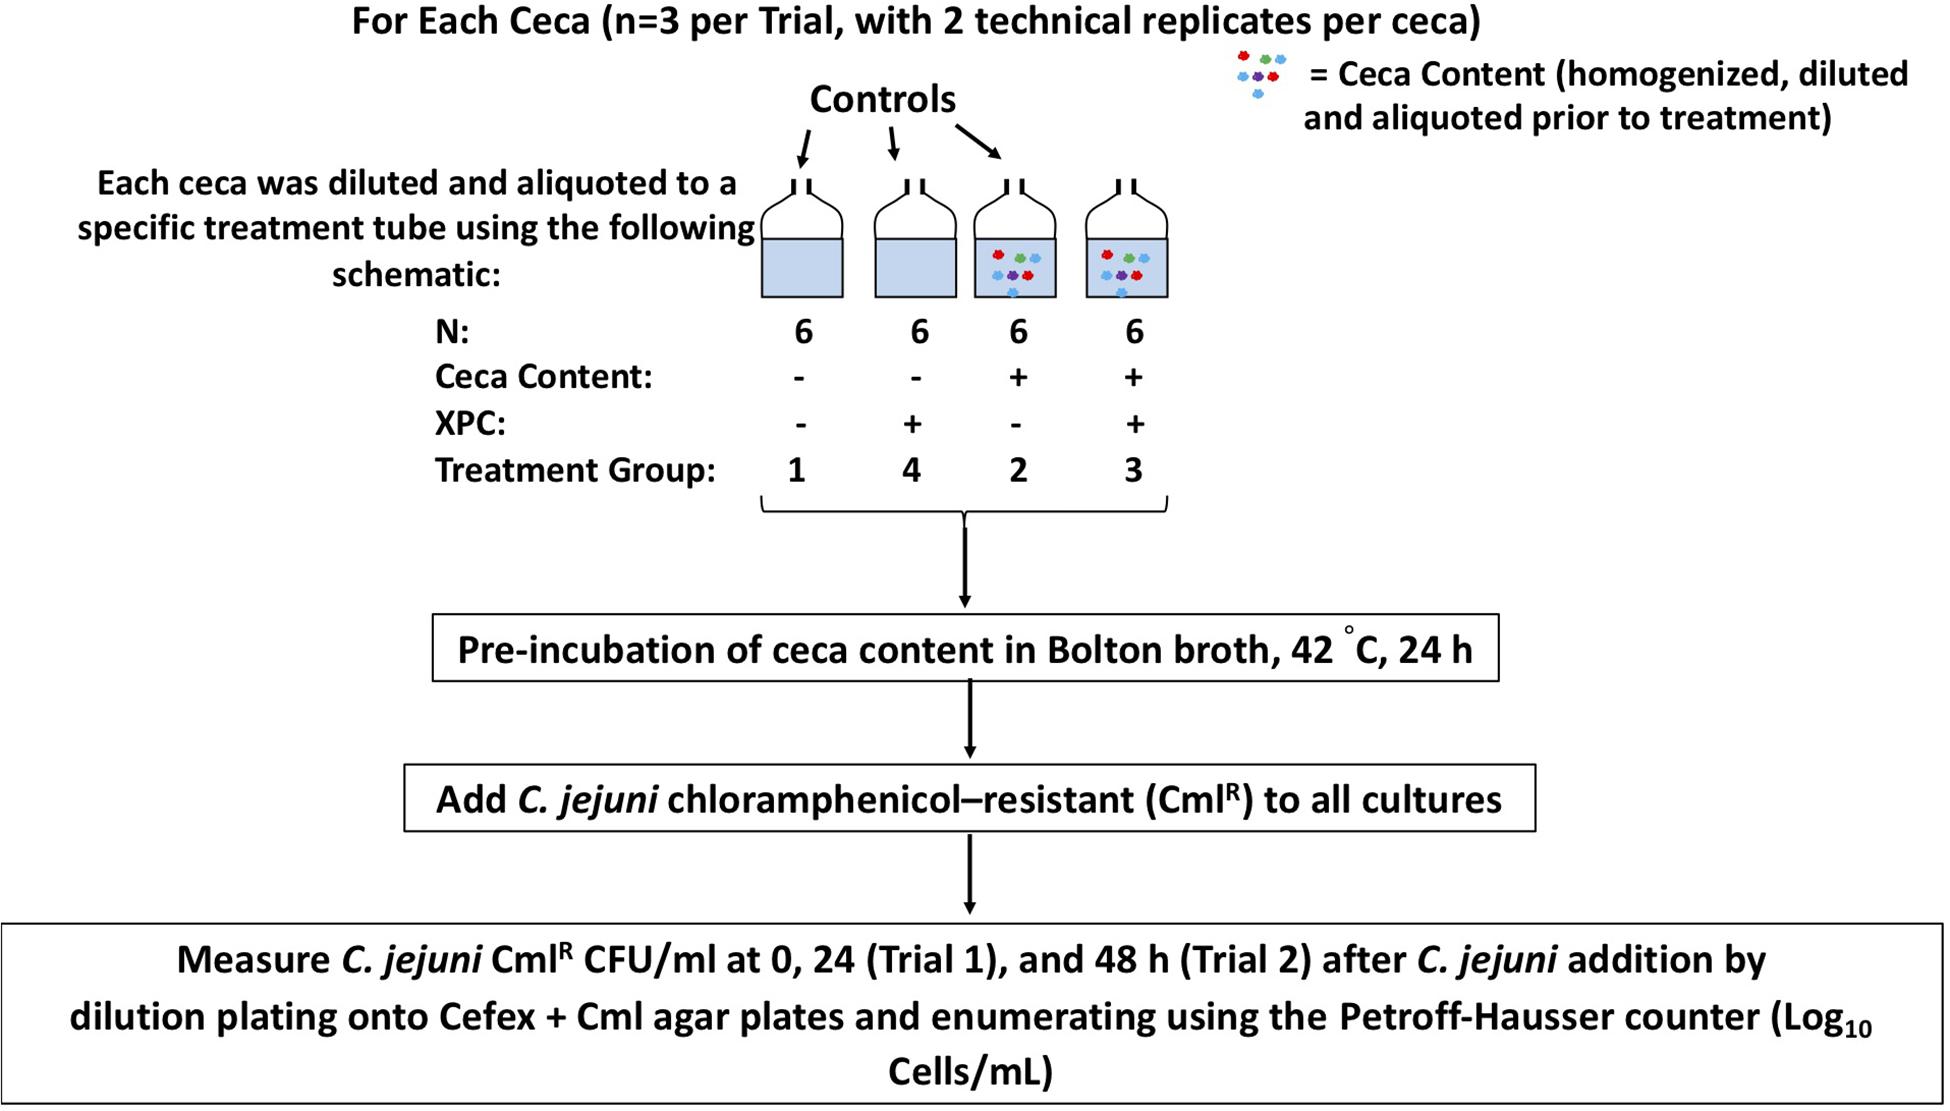 Frontiers The Preliminary Development Of An In Vitro Poultry Cecal Culture Model To Evaluate The Effects Of Original Xpctm For The Reduction Of Campylobacter Jejuni And Its Potential Effects On The